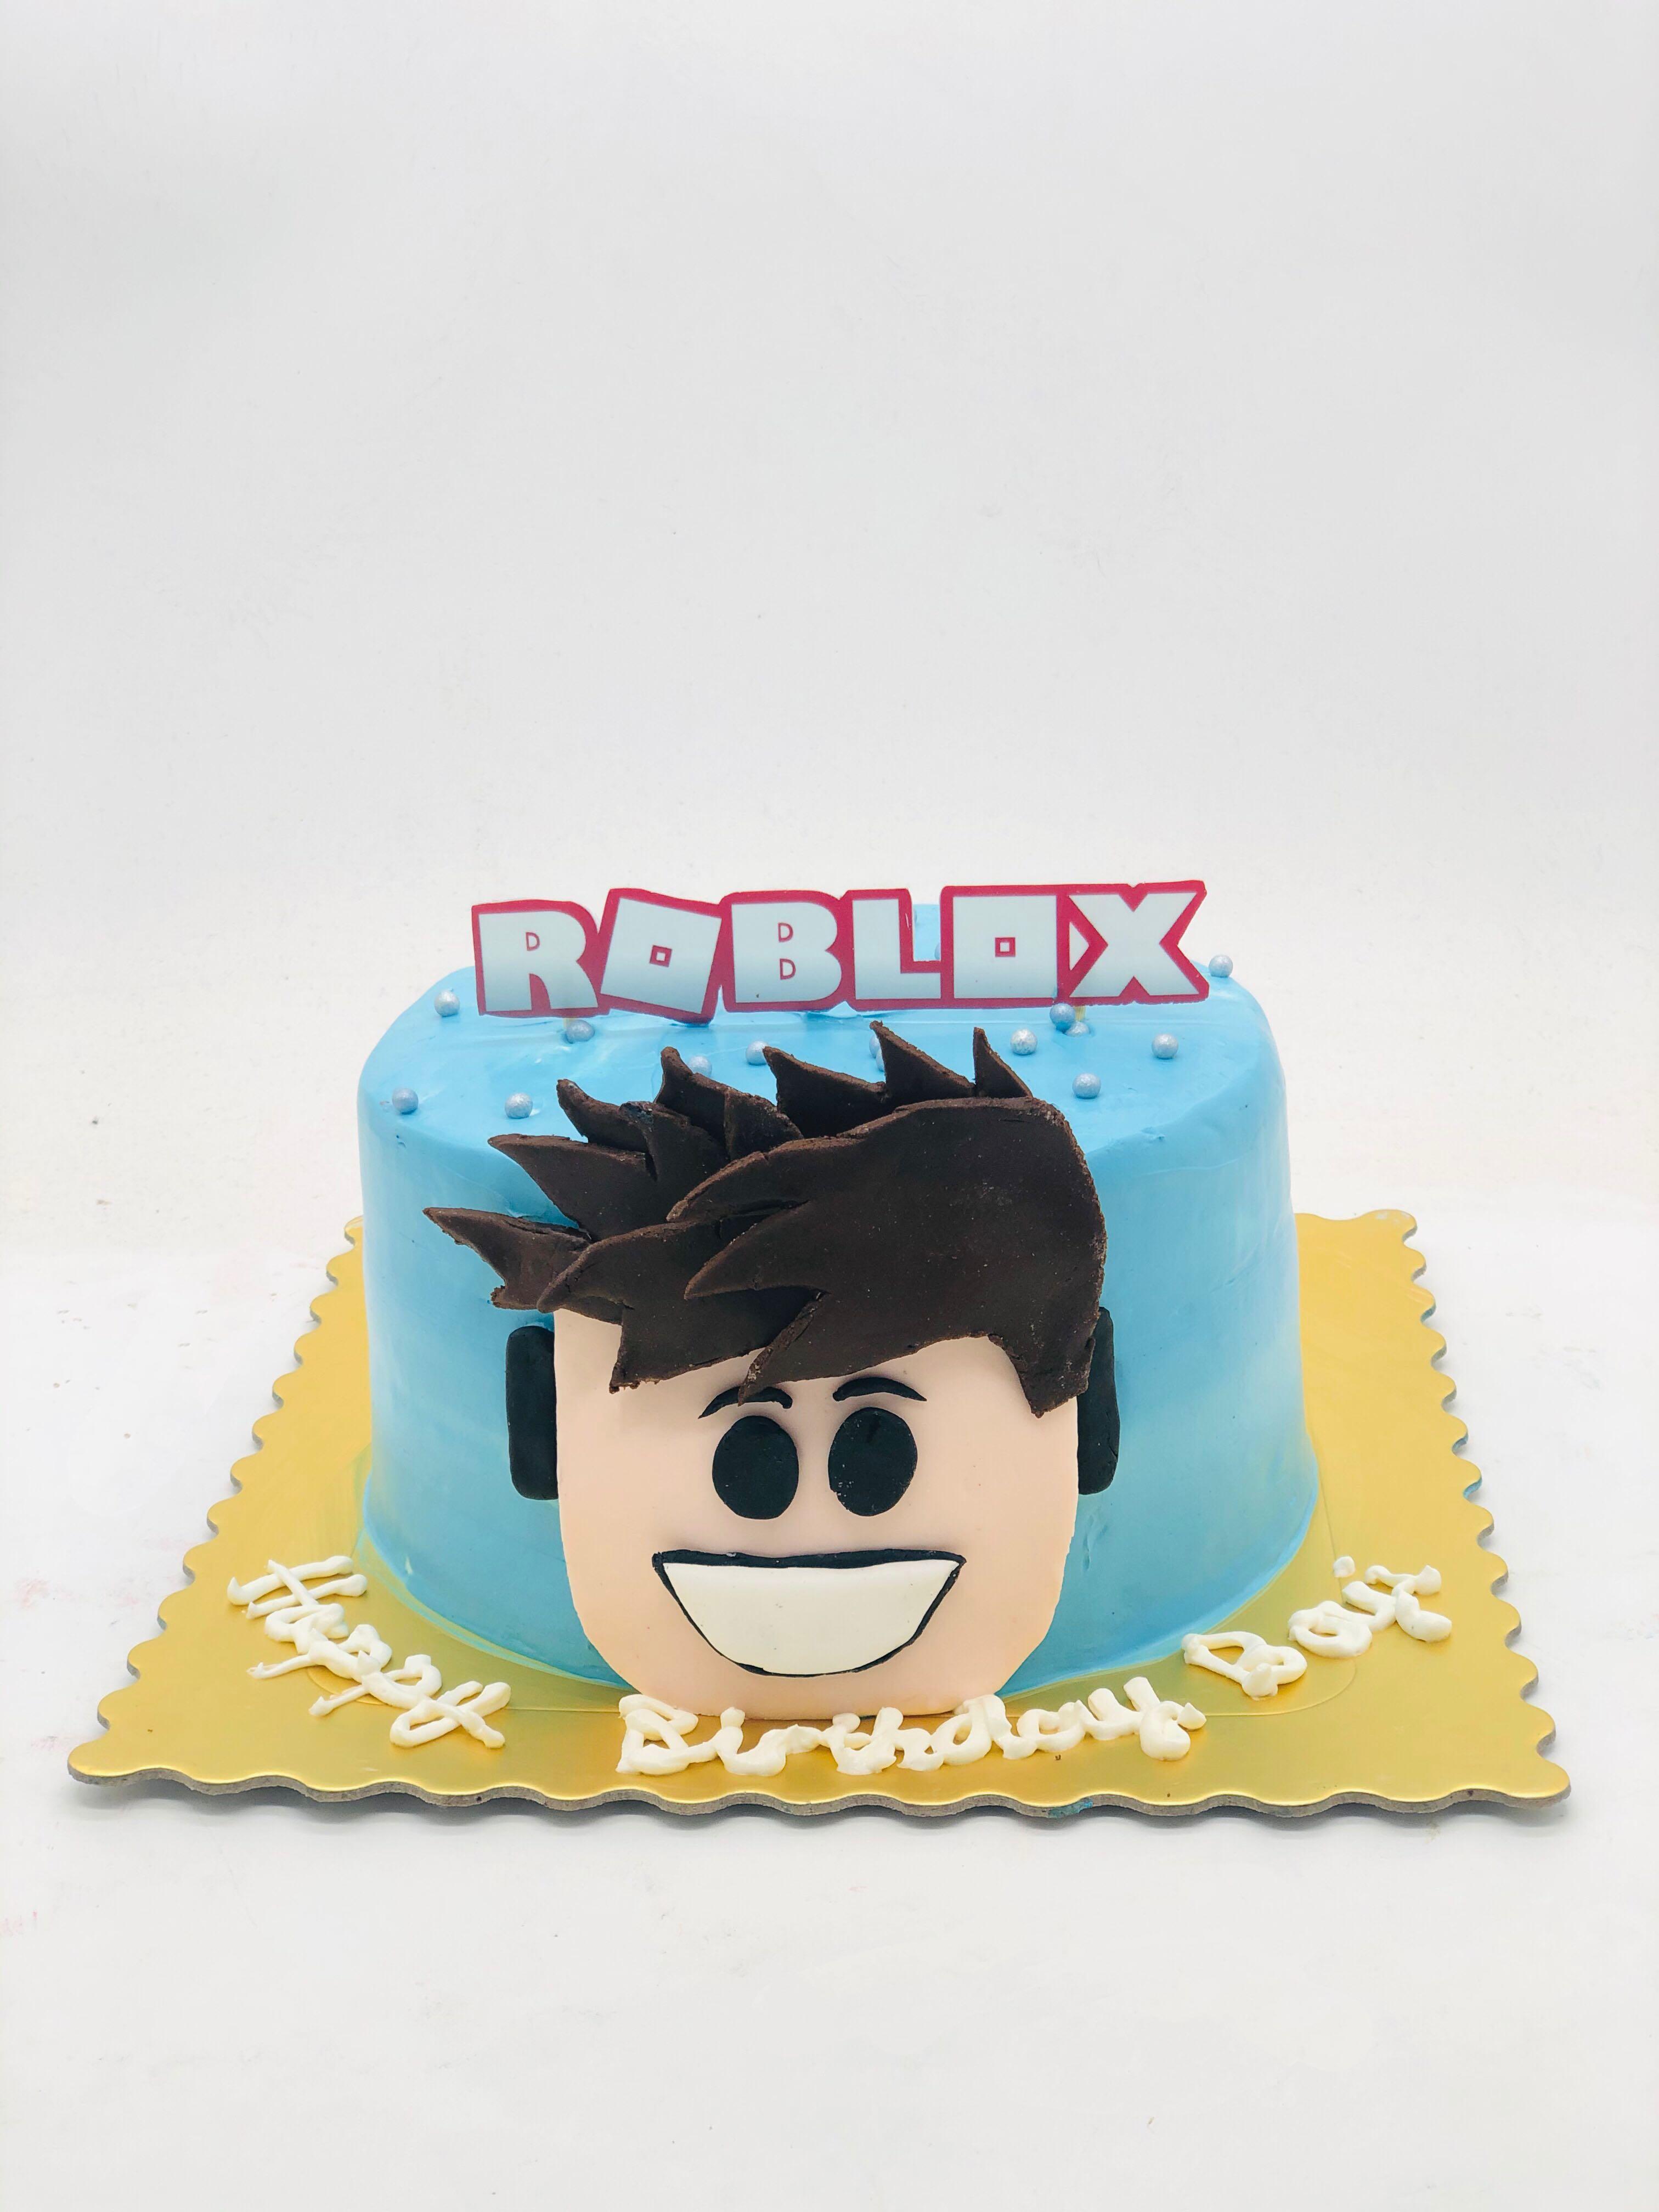 Roblox Theme Cake Food Drinks Baked Goods On Carousell - roblox theme cake design